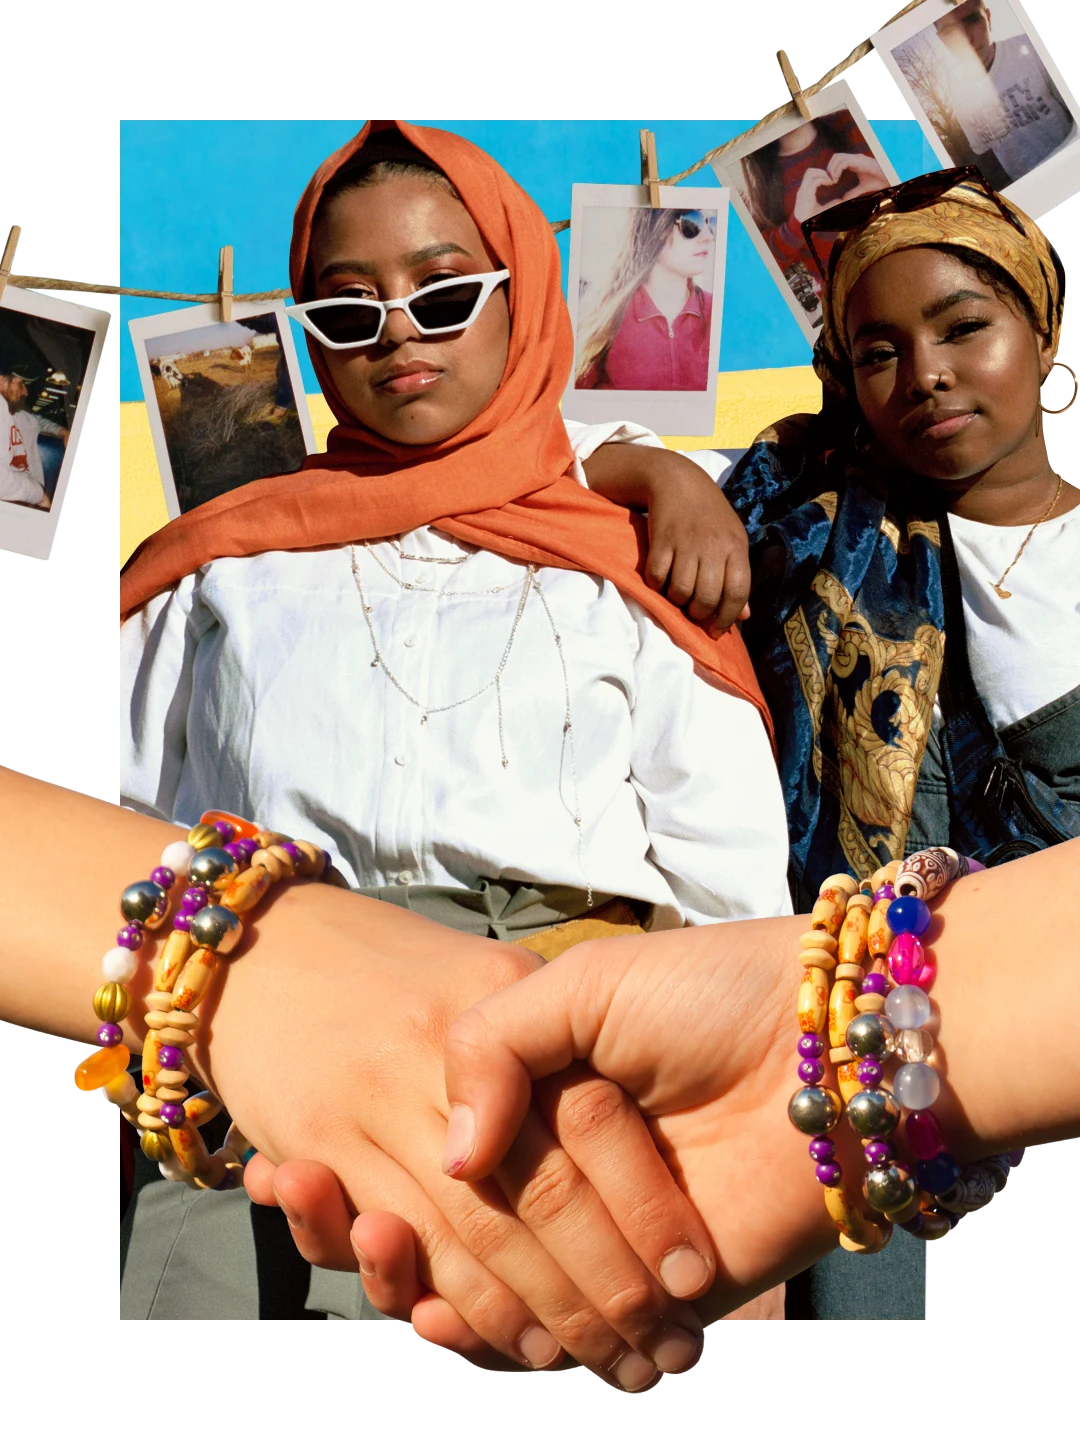 Hands with bracelets and rings slip into each other at the bottom. Instant photos are hanging on a clothesline at the back, against a blue and yellow background. Two Black women wearing headscarves are in the centre, with one resting a hand on the other’s shoulder.
